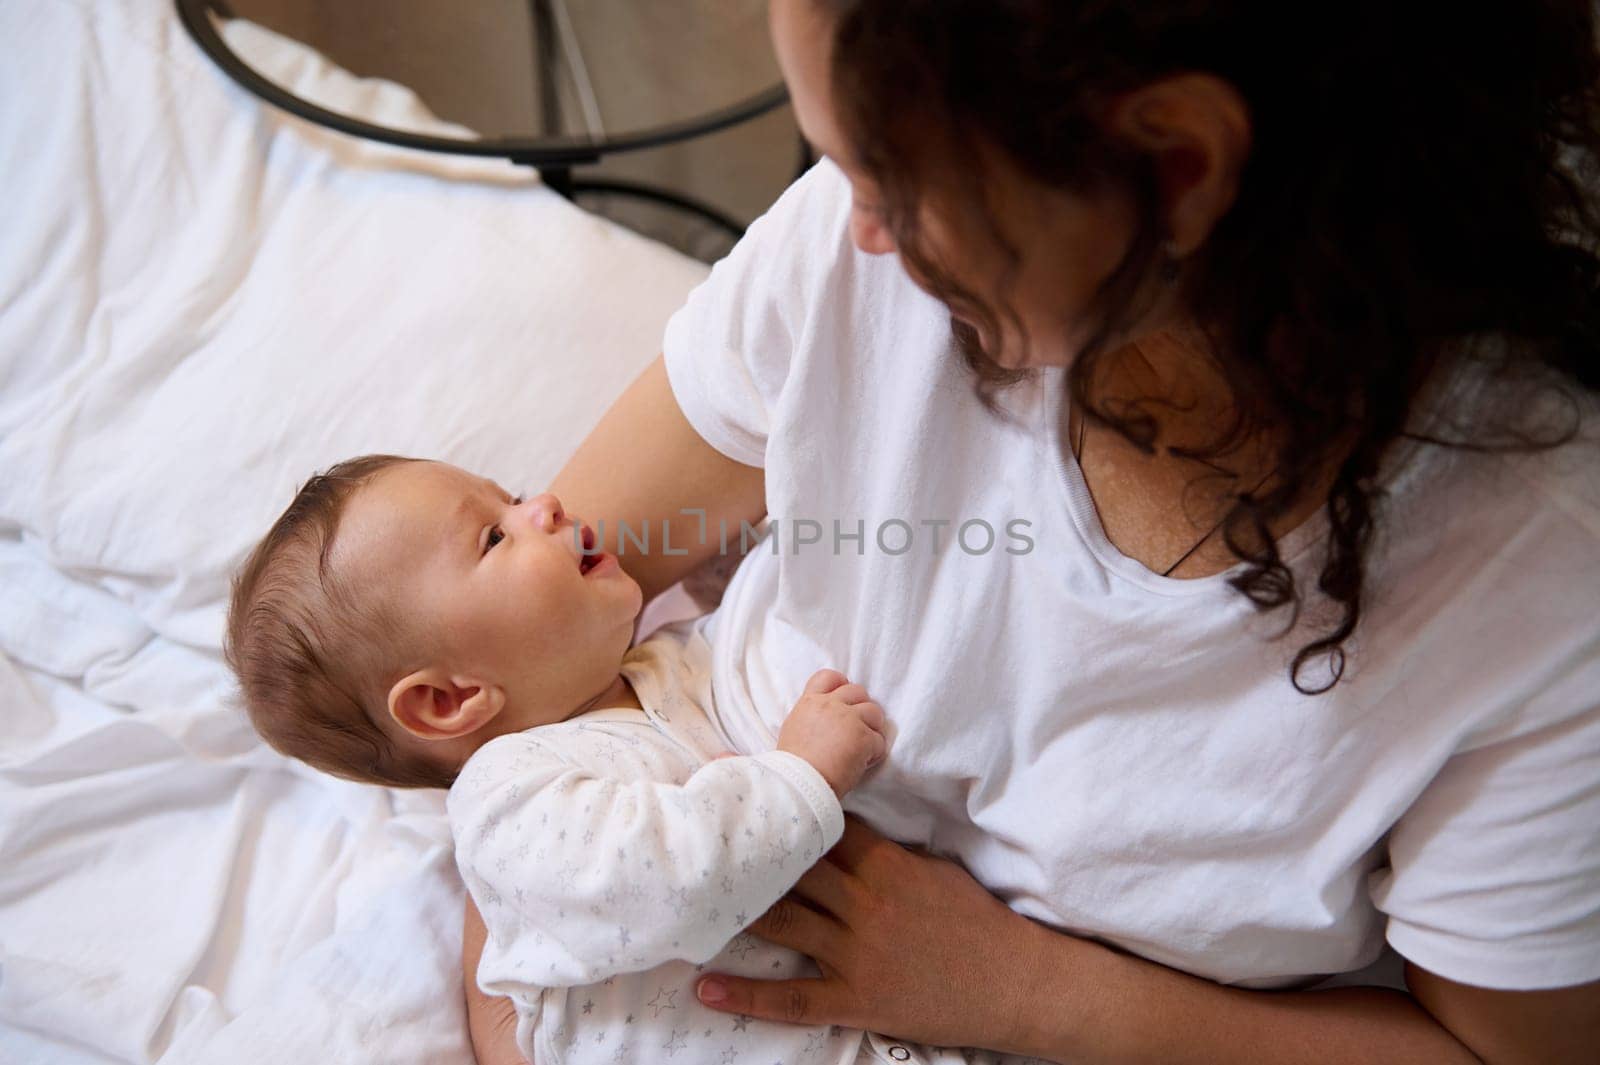 Authentic portrait of curly brunette young adult woman, happy loving mother smiling, expressing positive emotions while breastfeeding and cuddling her newborn baby. People. Maternity leave lifestyle.